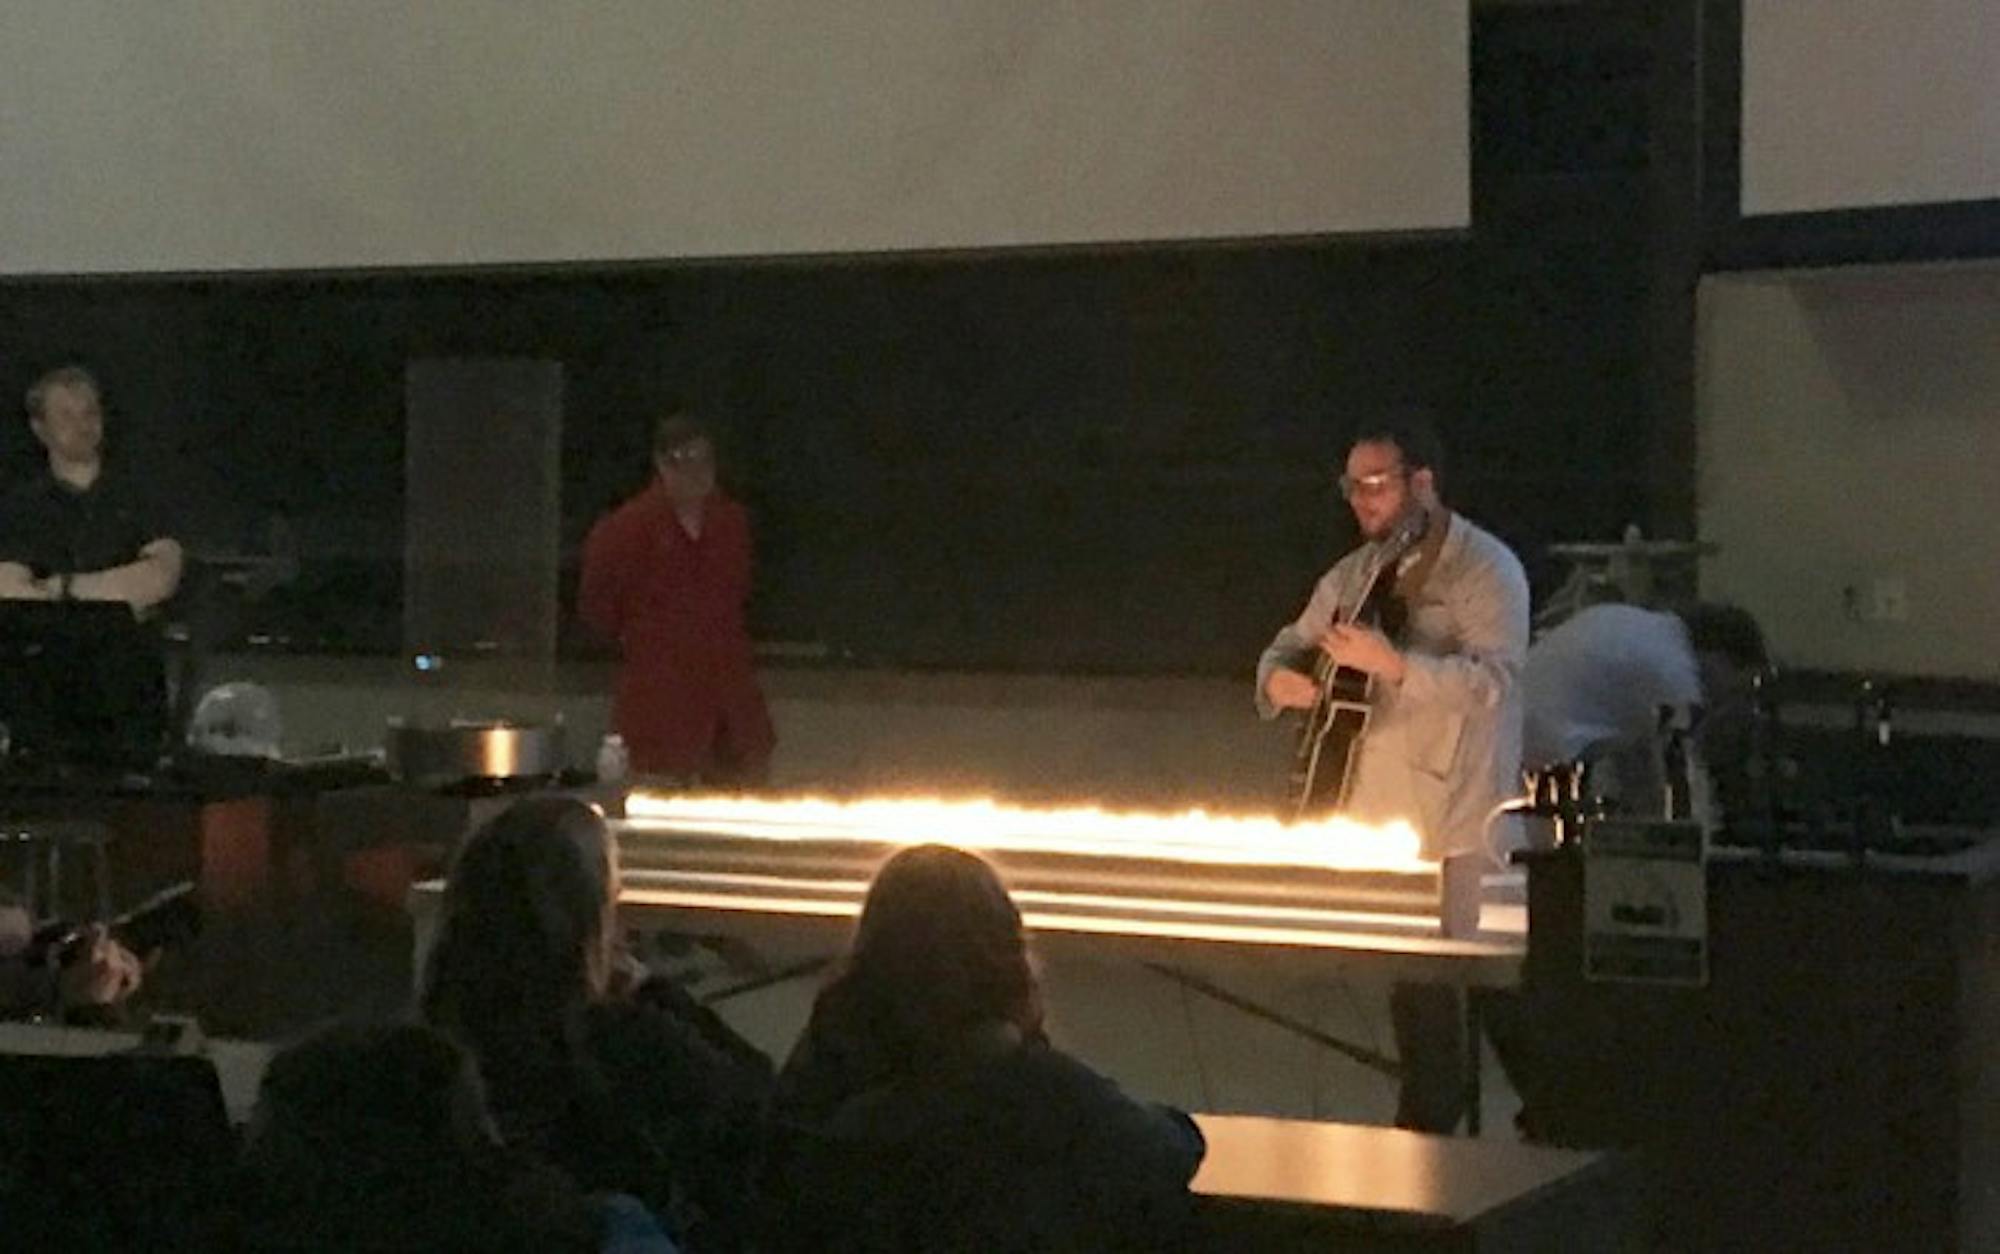 Graduate student Craig Reingold performs an experiment using an electric guitar and fire during Tuesday's